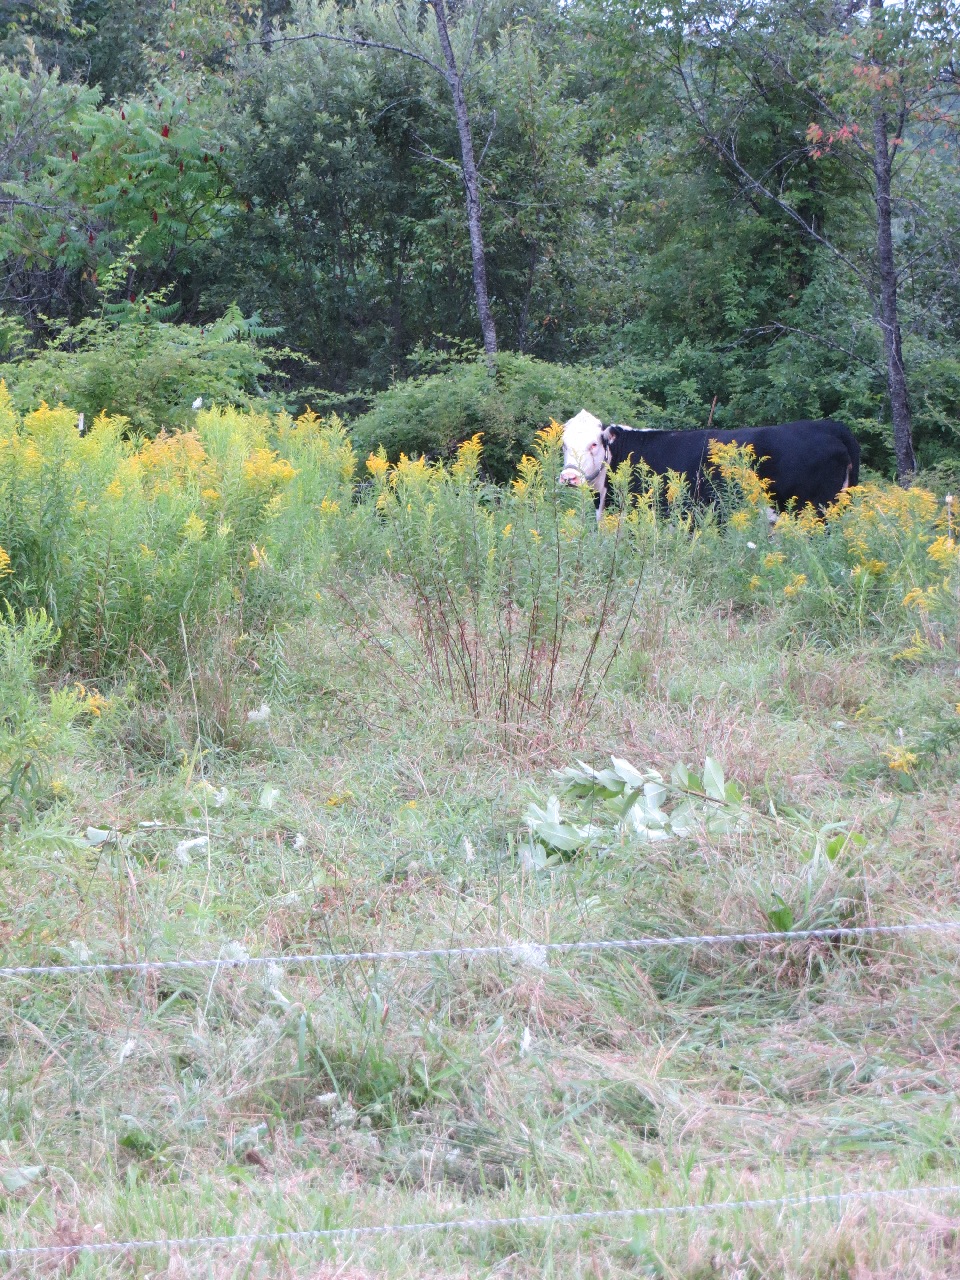 A white-and-black cow in a field overgrown with goldenrod. You can see the cows have been poking around eating the grass underneath the inedible weeds.